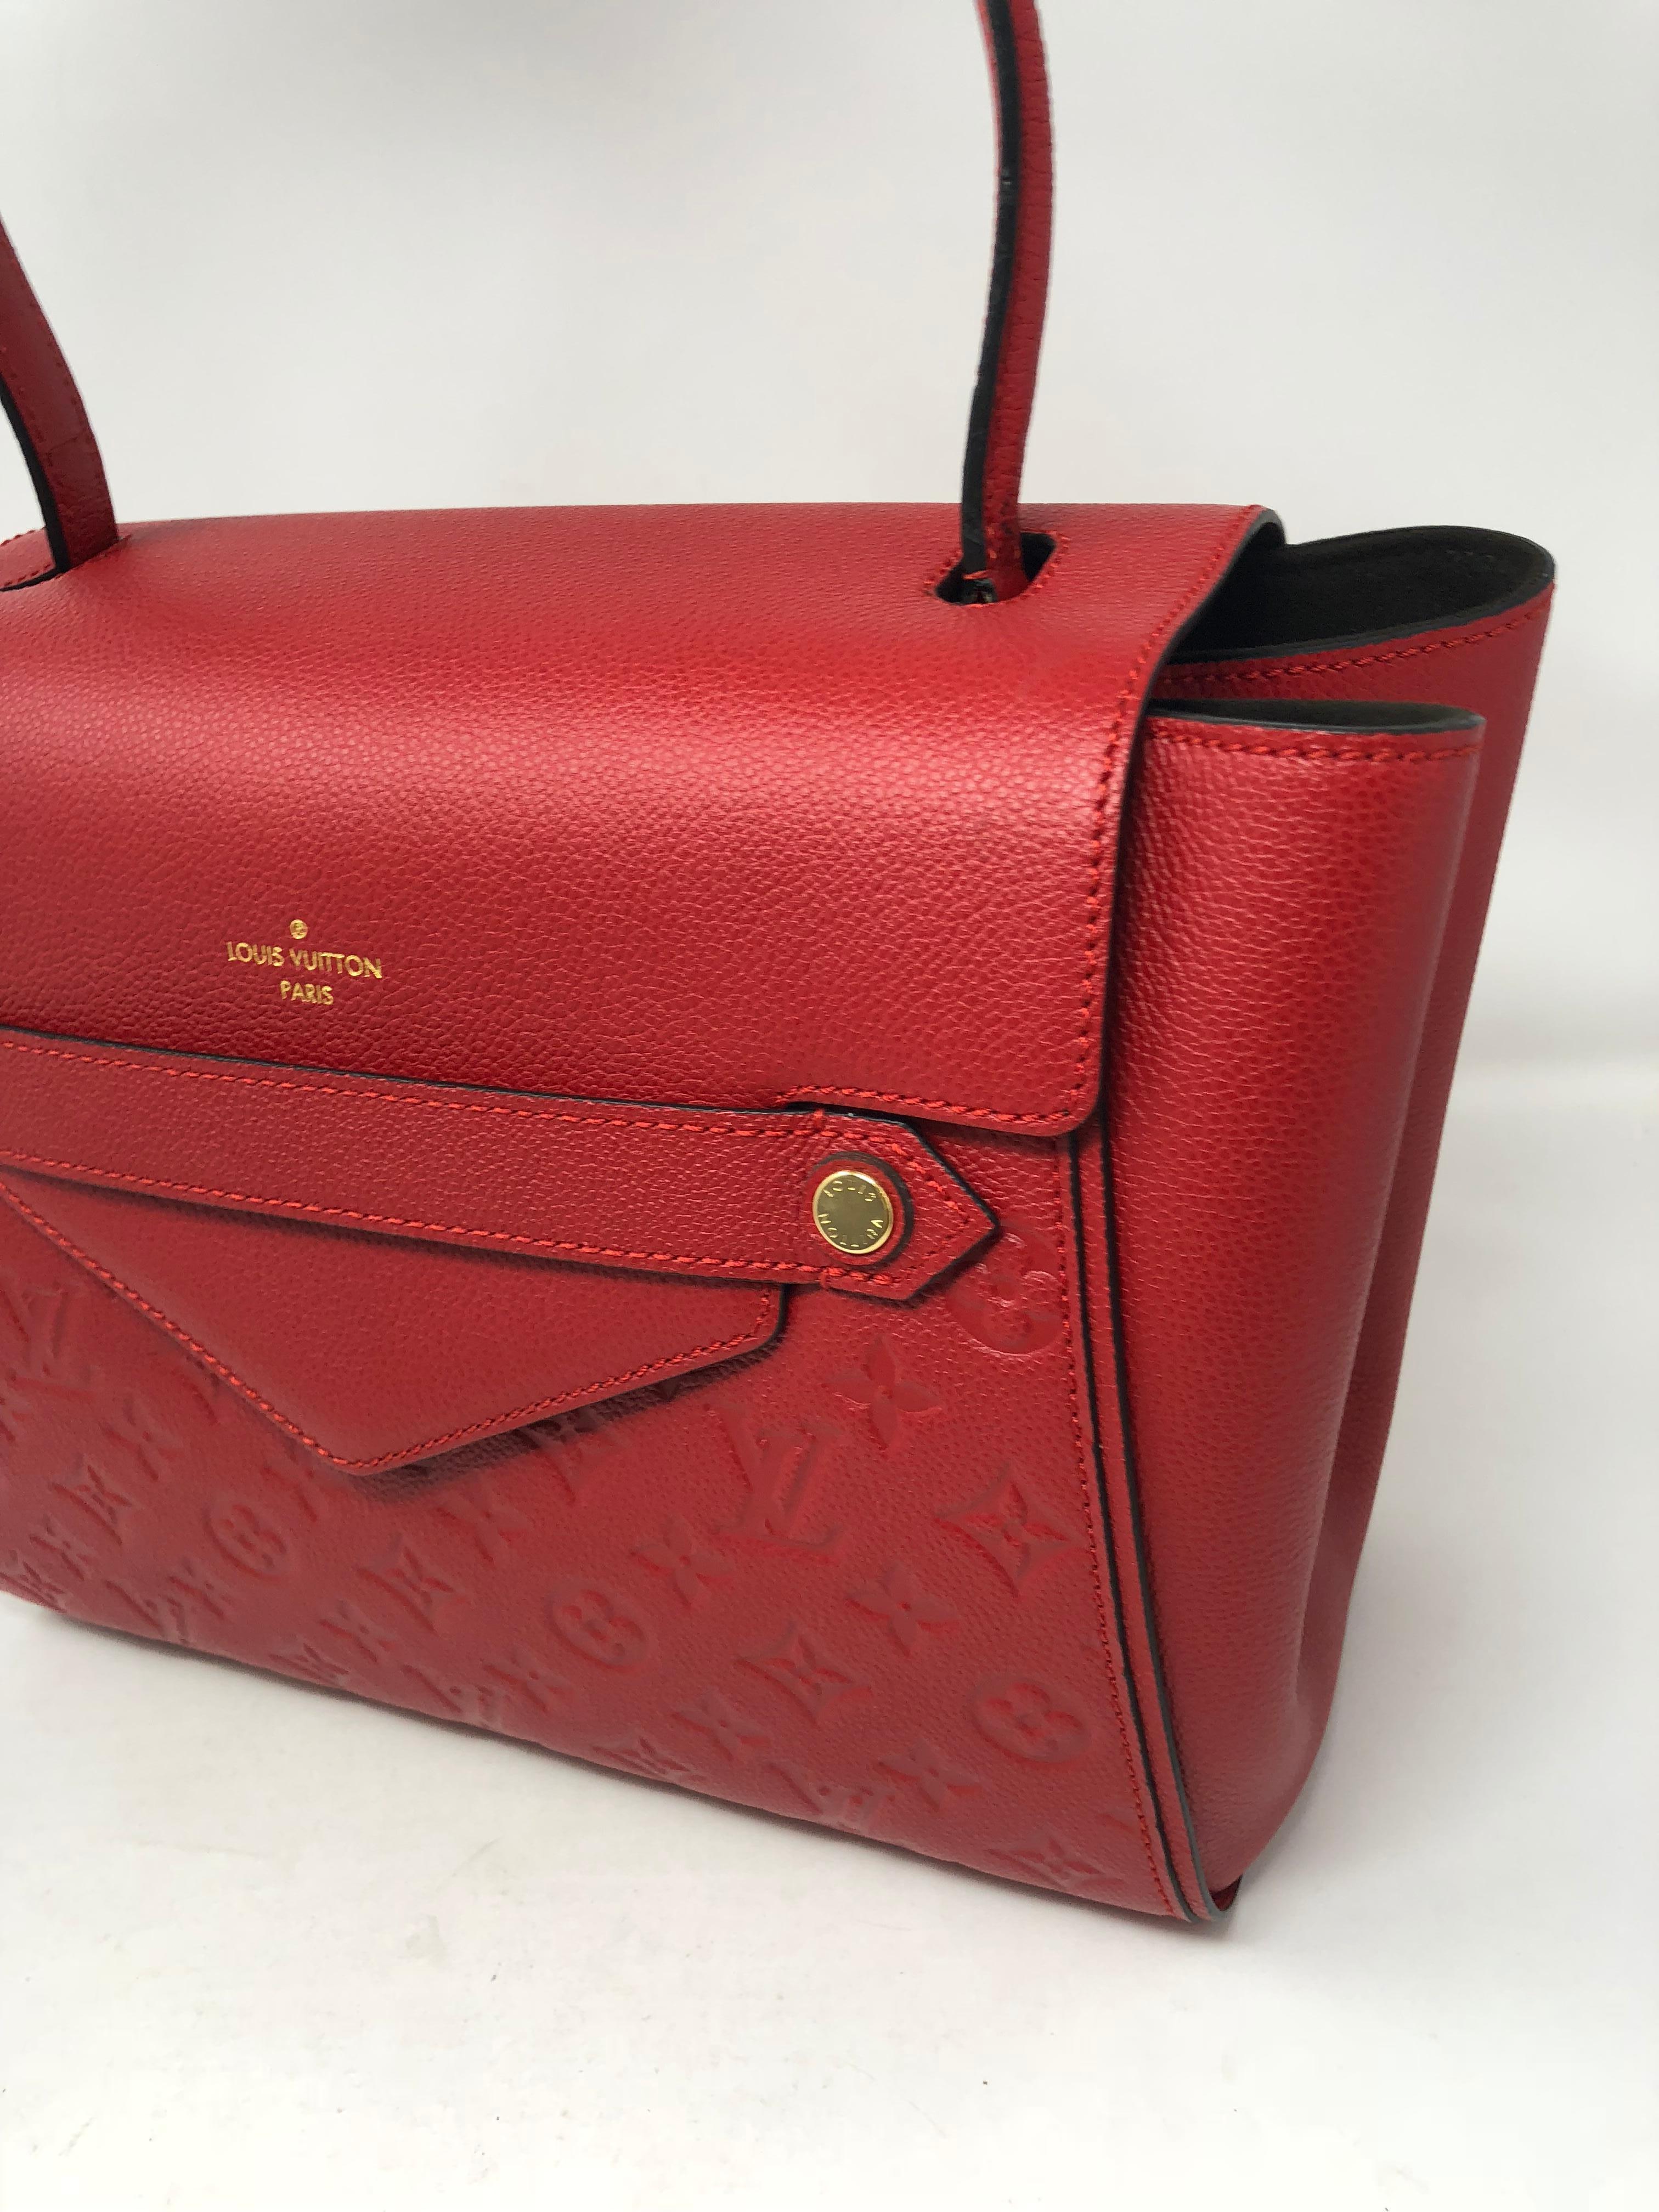 Red Louis Vuitton Monogram Trocadero bag in eimpreinte leather. Box style bag with one strap. Unique design and discontinued. Lady like style and can hold small laptop. 